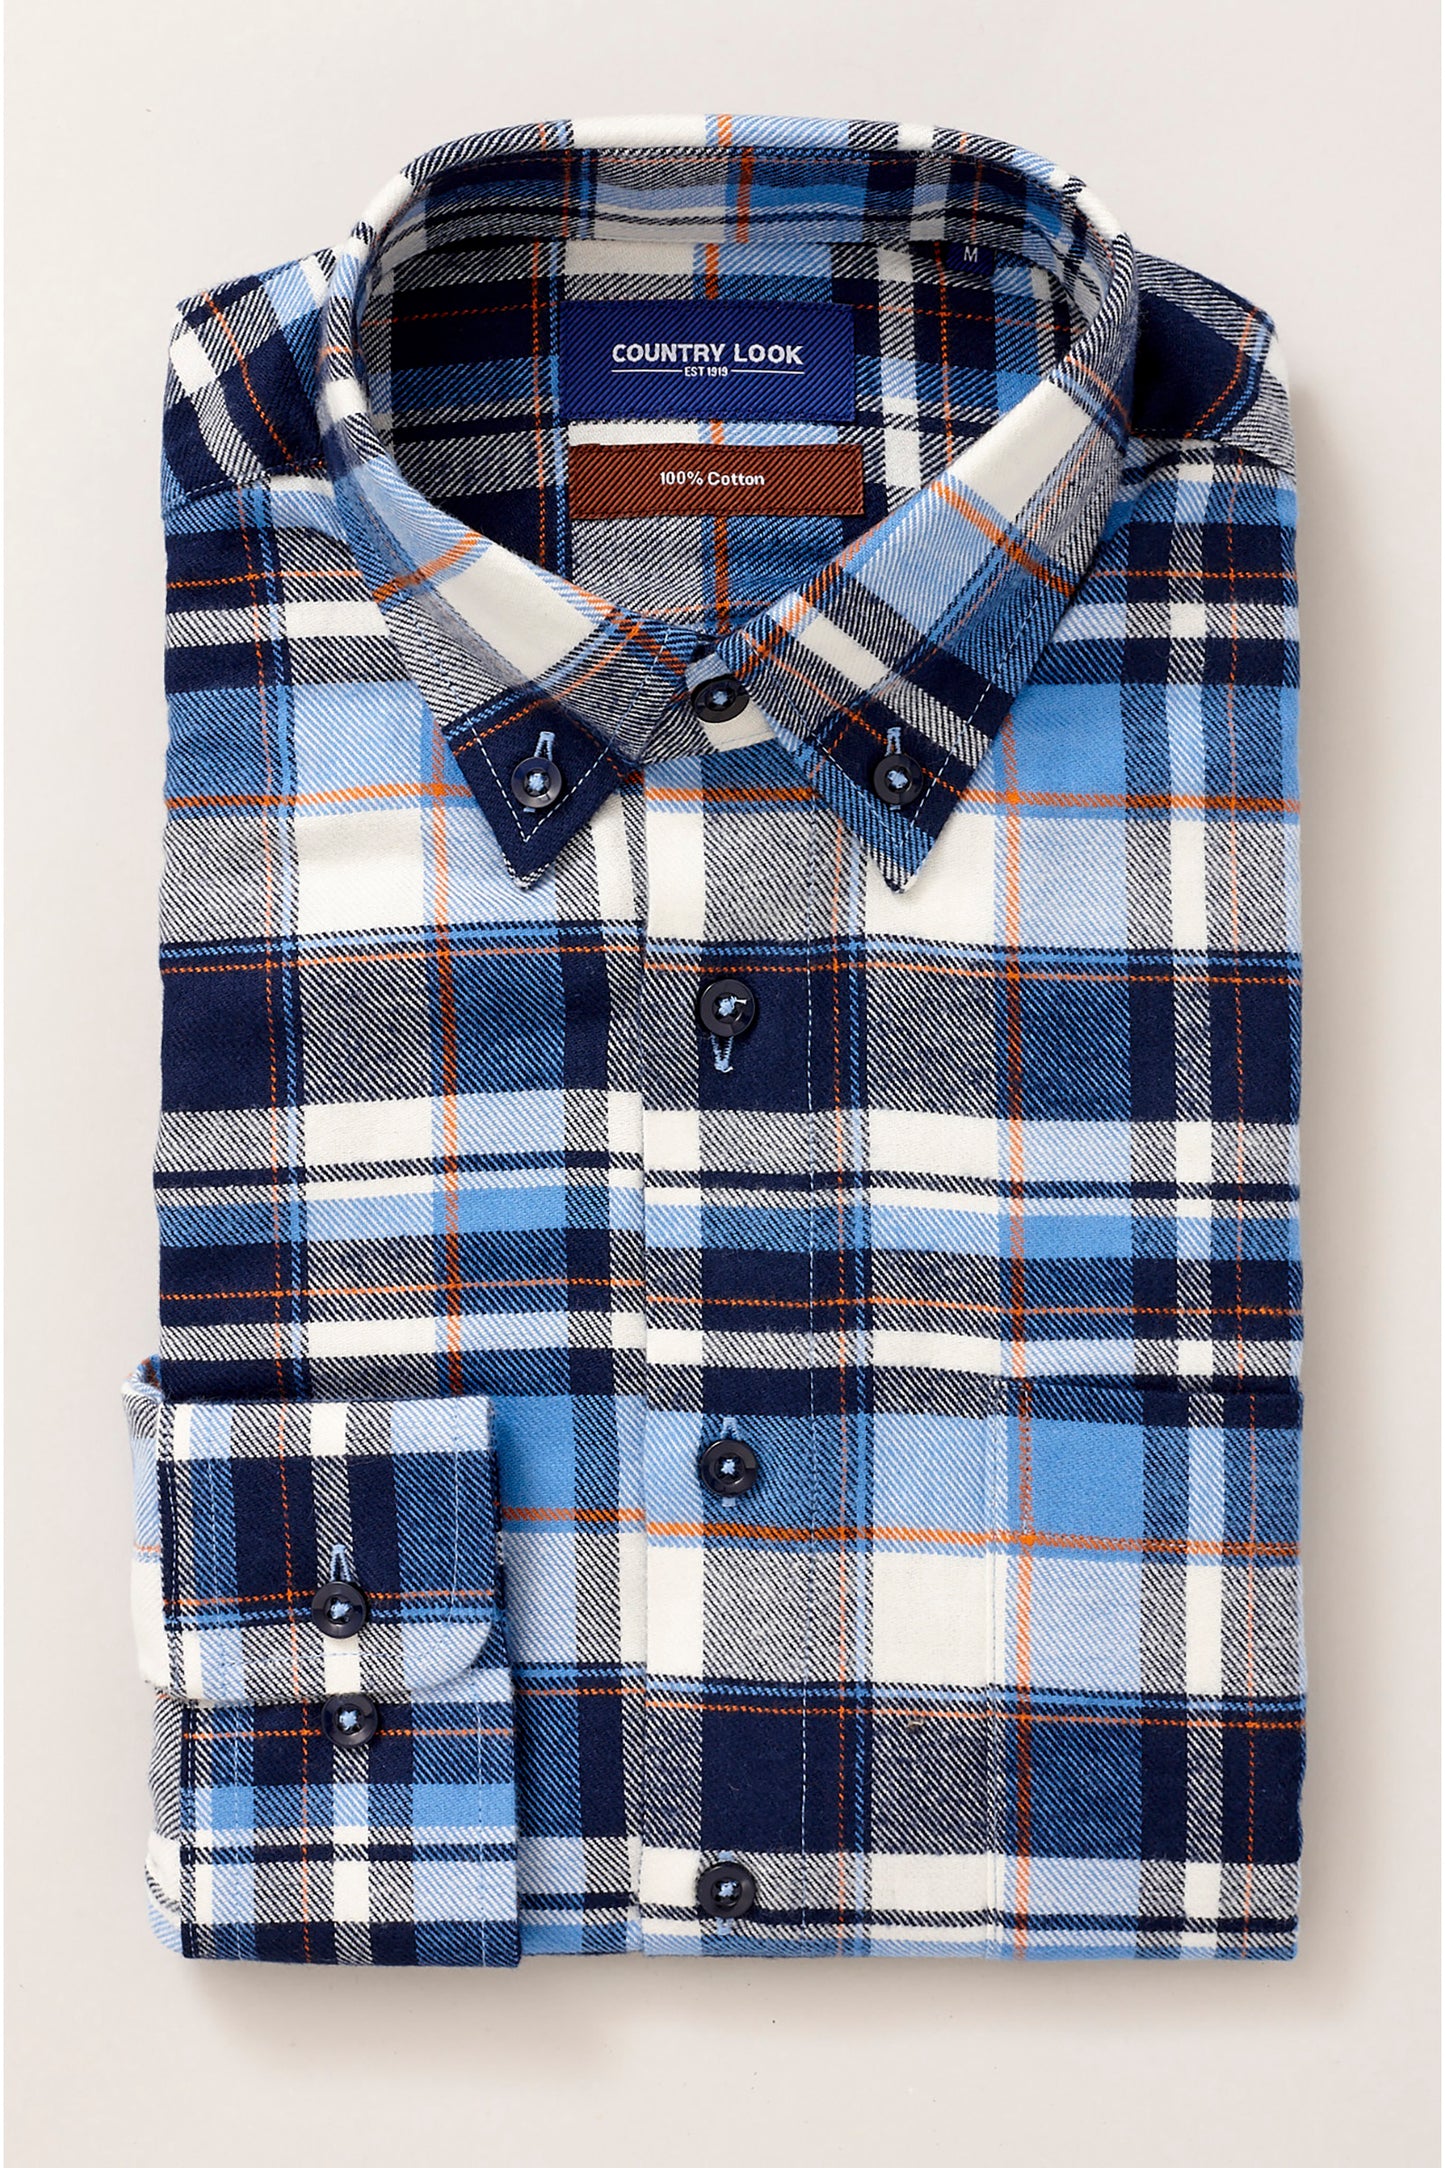 Country Look - Galway Winter Weight Shirt - Blue/Orange